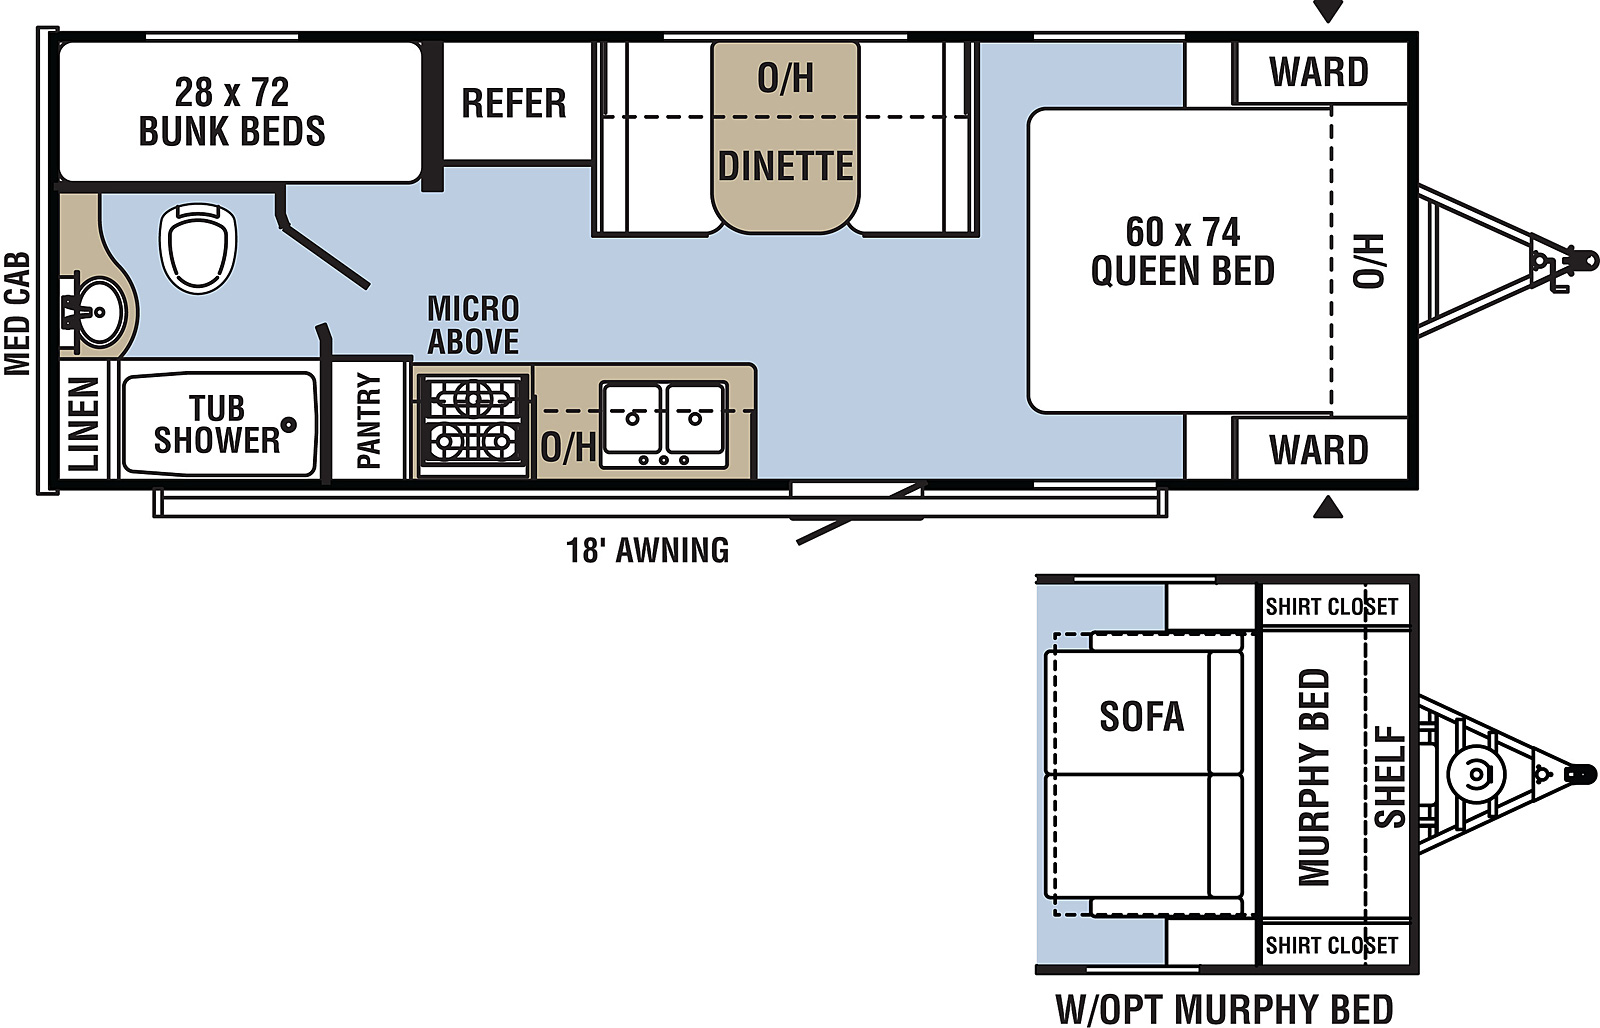 Clipper Ultra-Lite 21CBH floorplan. The 21CBH has no slide outs and one entry door.